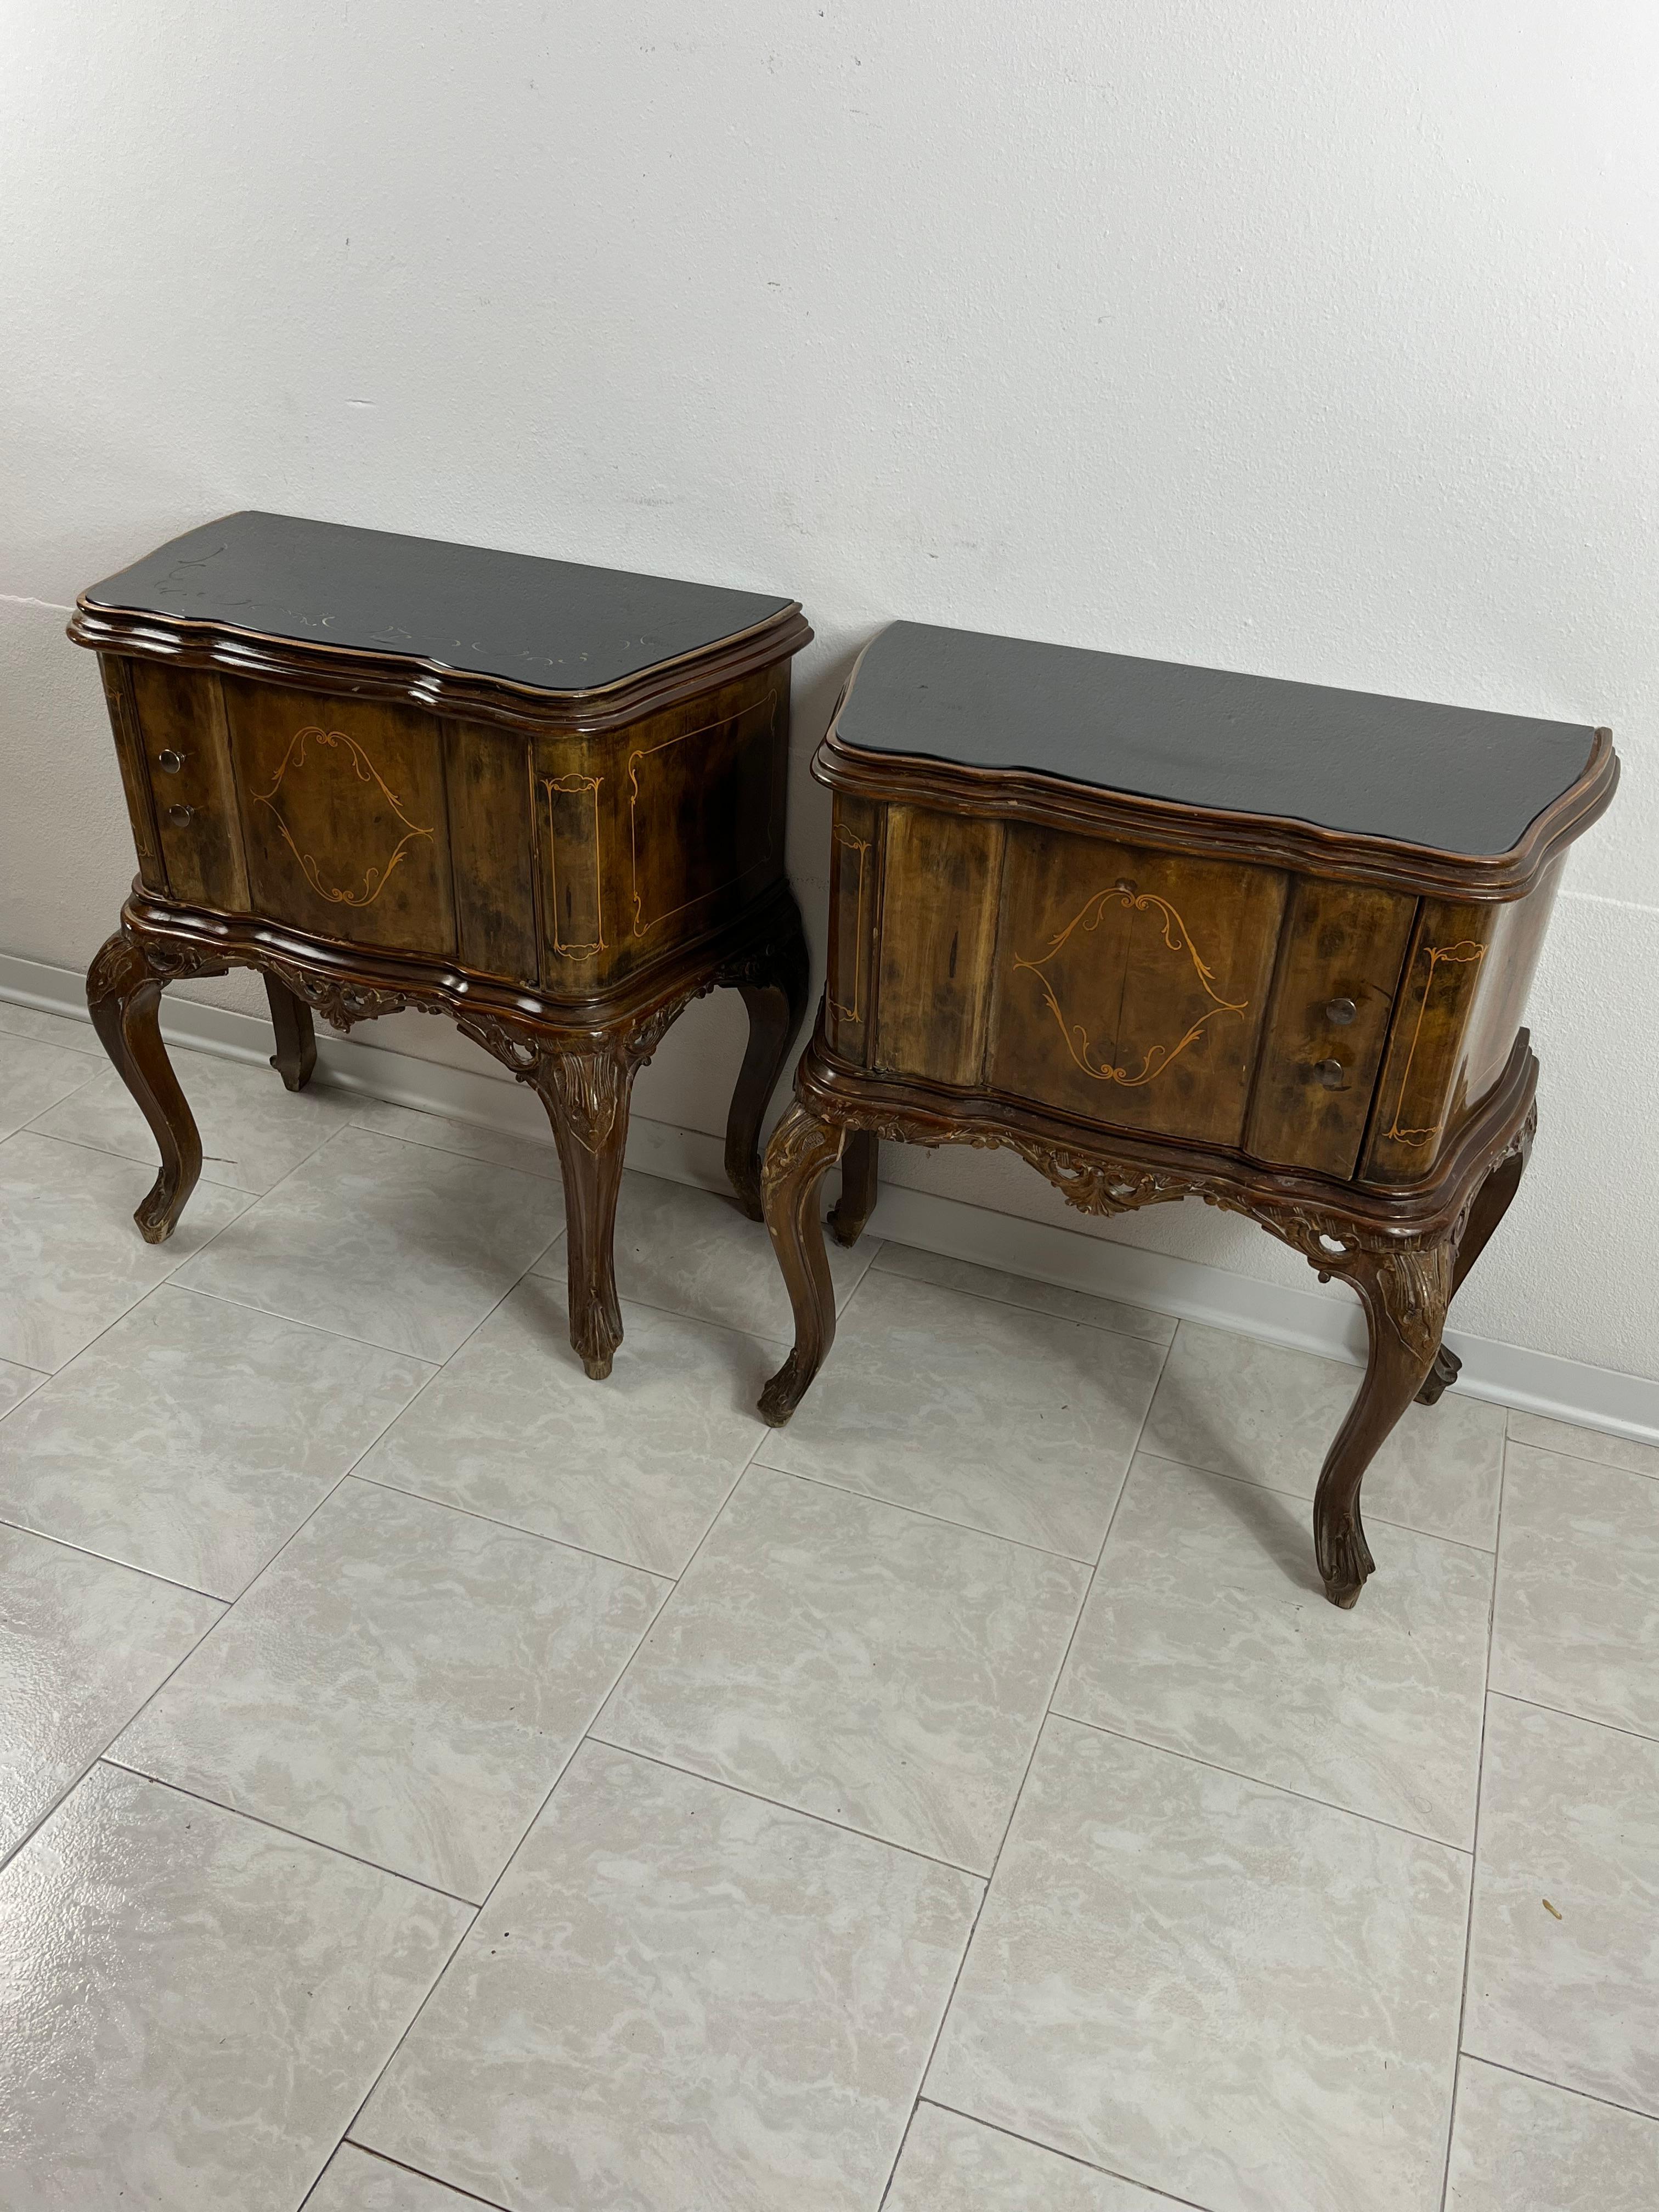 Set of 2 Mid-Century Spinelli & Anzani 1950s bedside tables
Intact and in good condition, glass top (one replaced).
Small signs of aging that do not affect the beauty of these Italian furnishing elements.